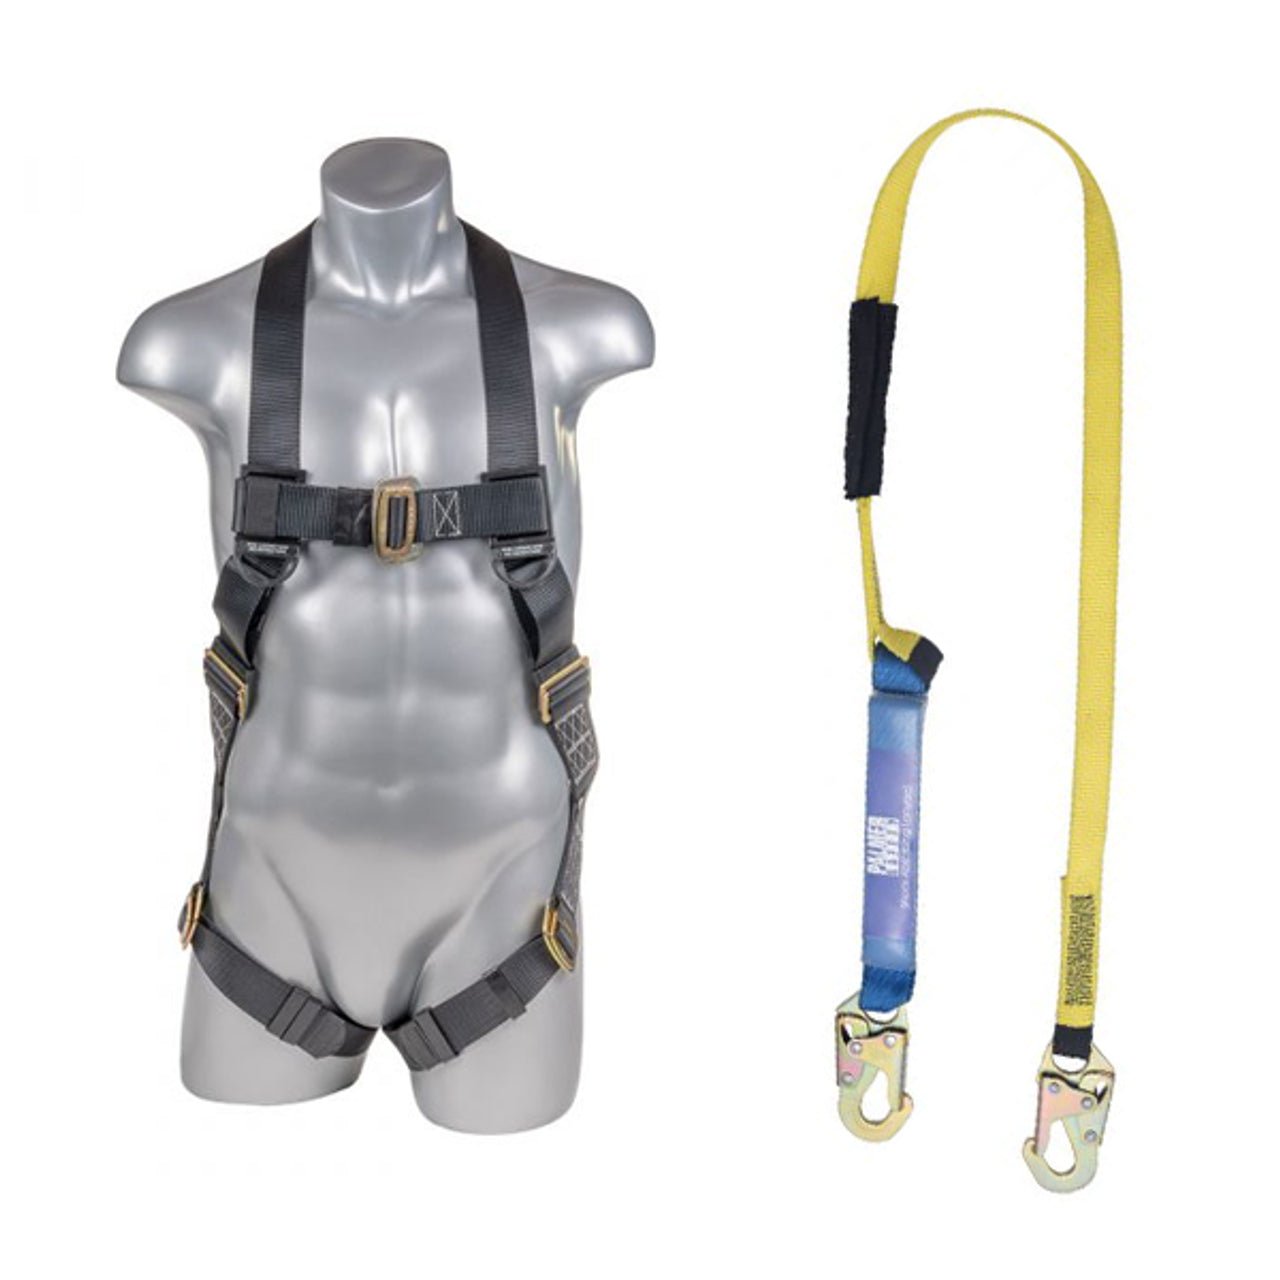 Full Protection 5pt. Body Harness and Lanyard Combo